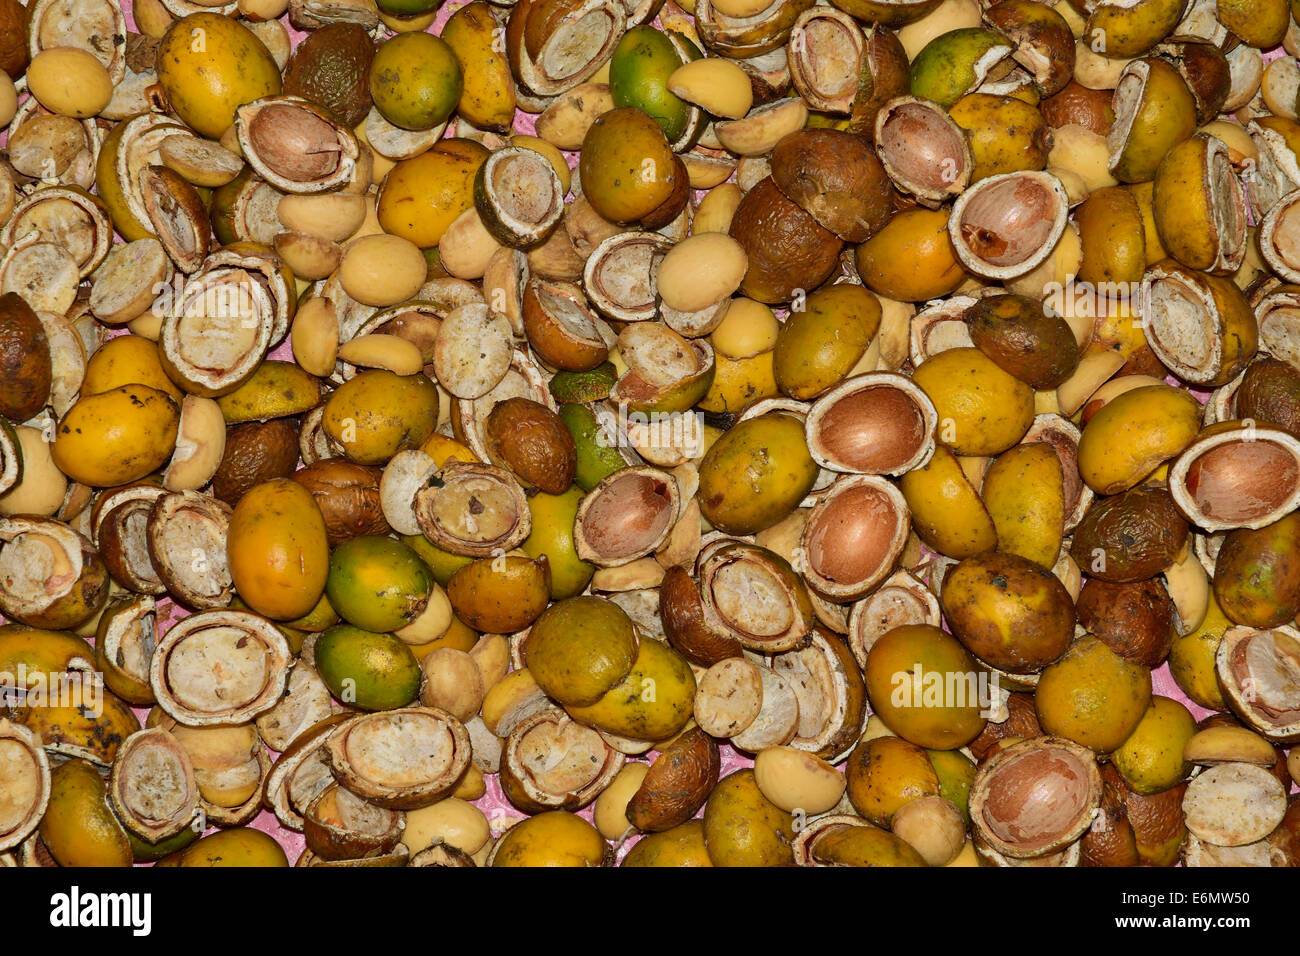 Nut of Cycas circinalis Linn, under drying process. Dried nuts can be used to make flour. Stock Photo